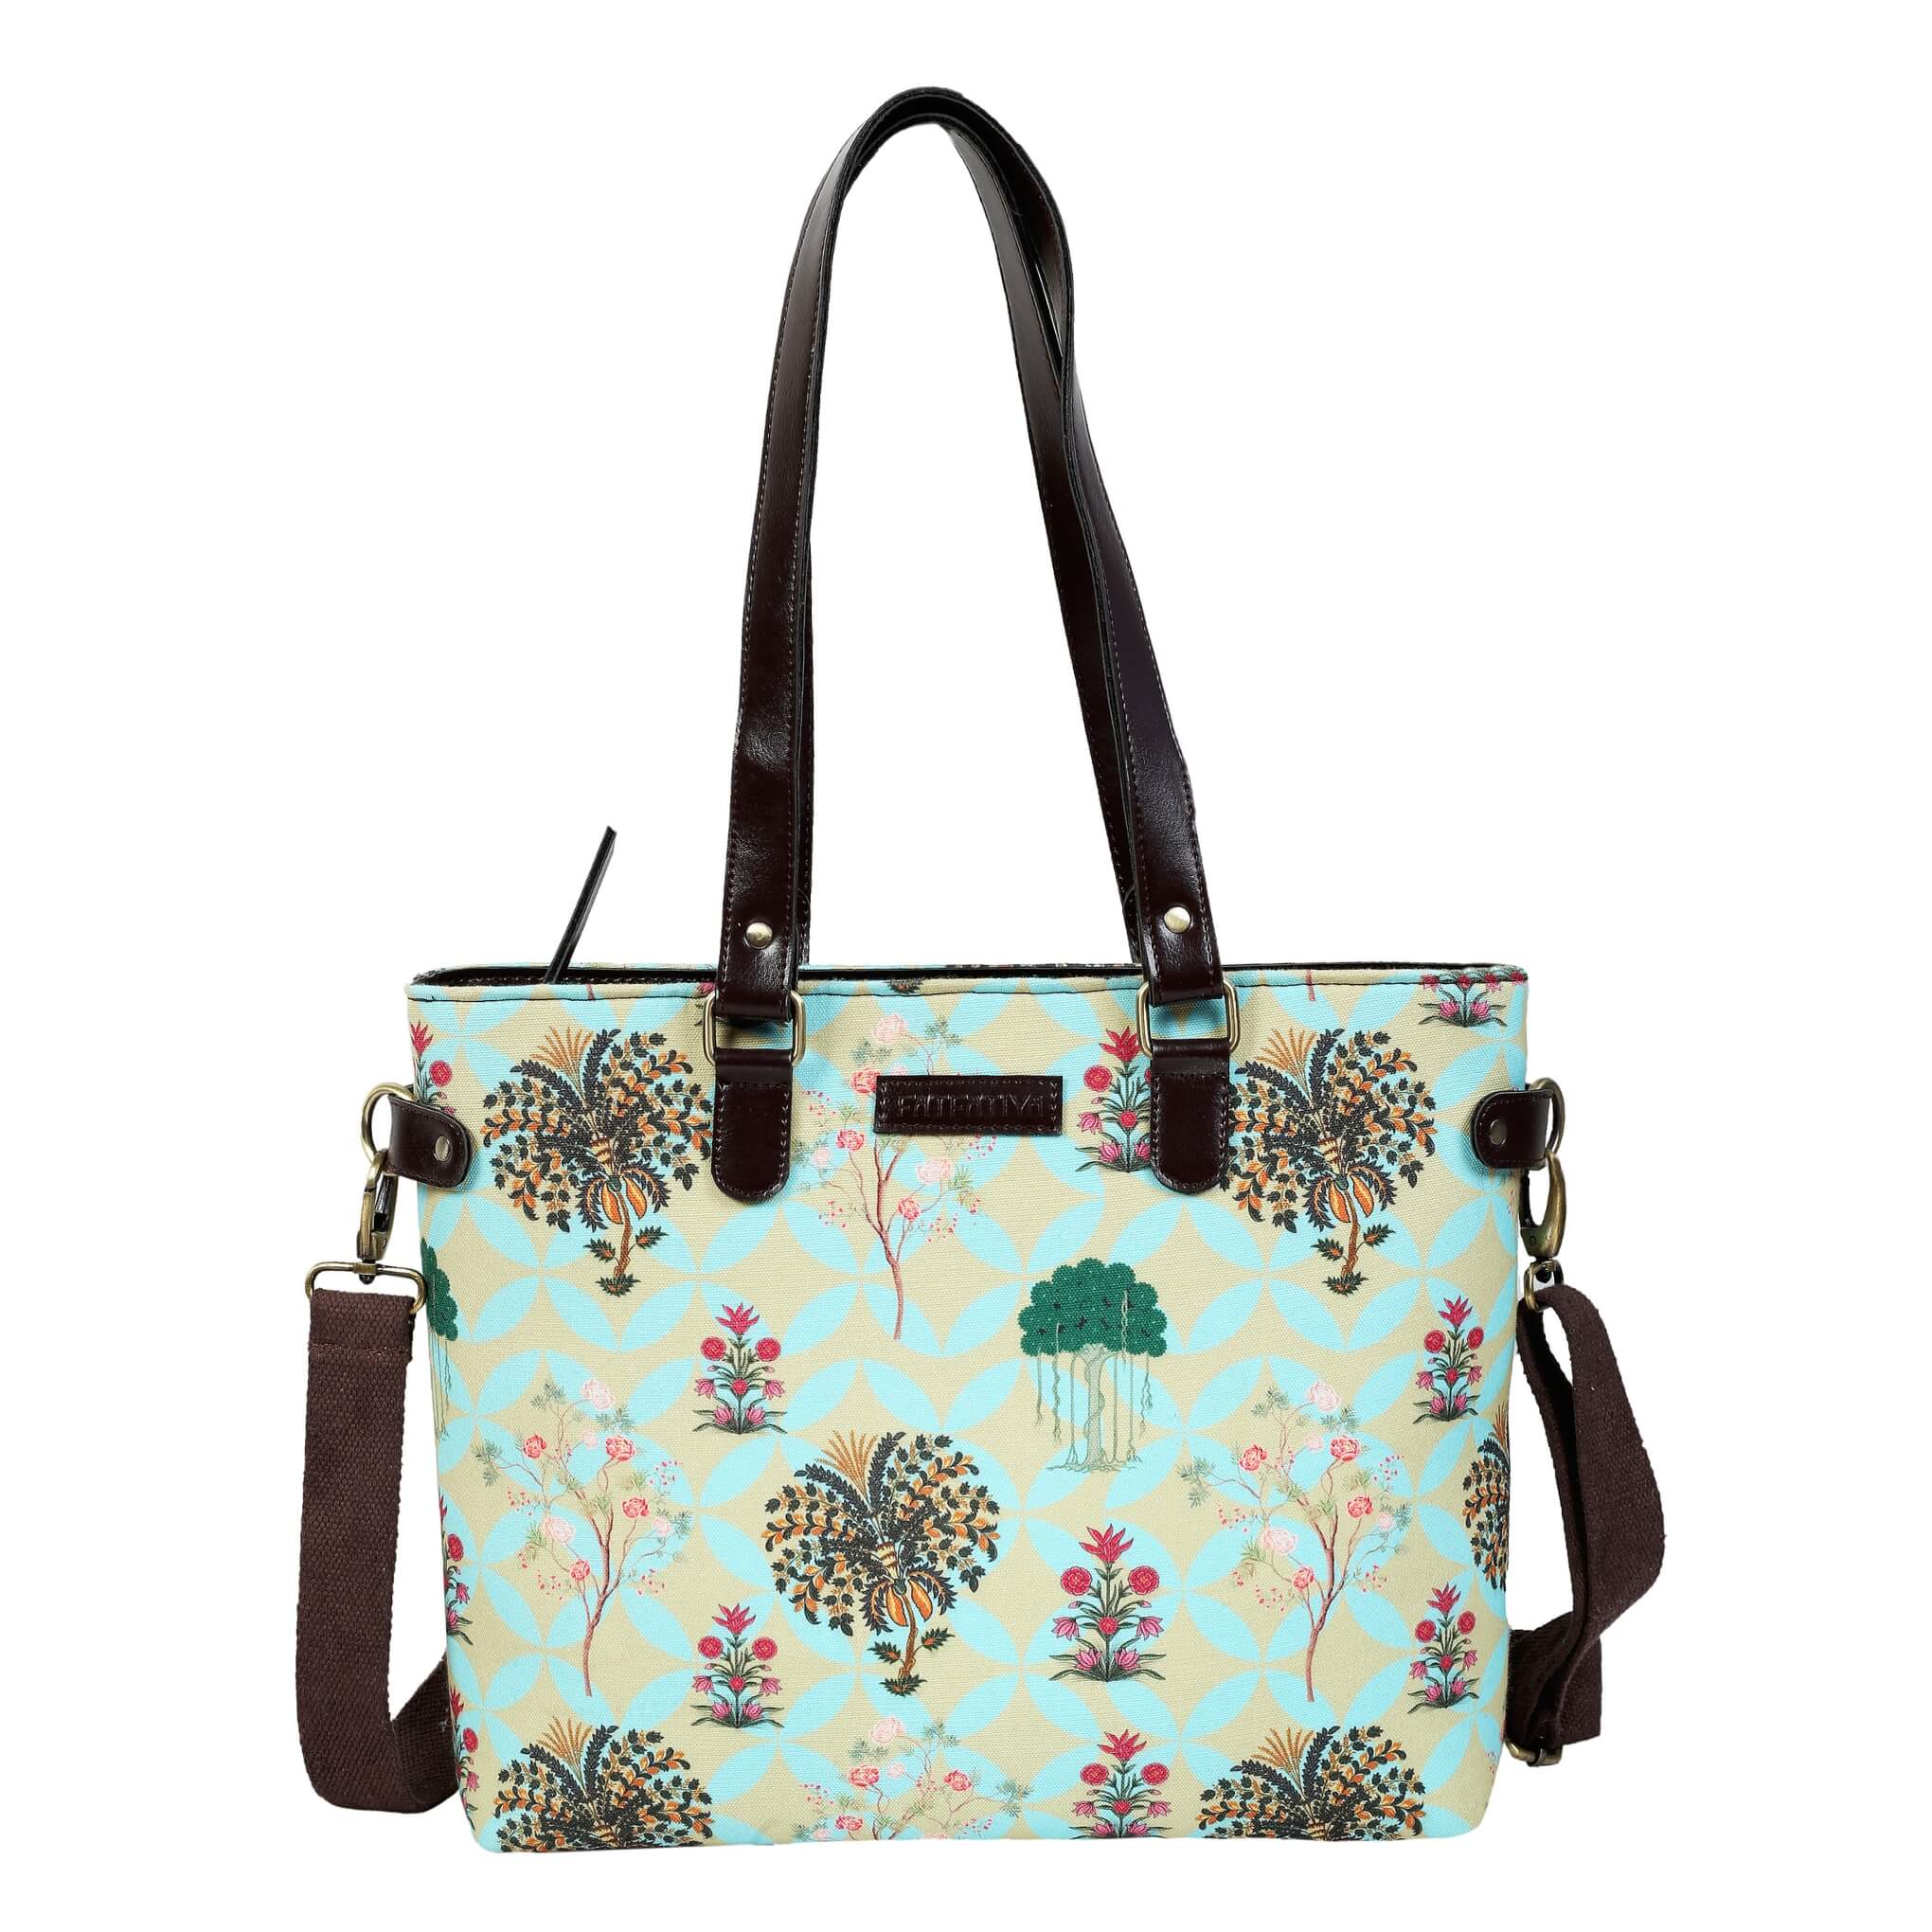 Garden Design Tote Bag With Compartments